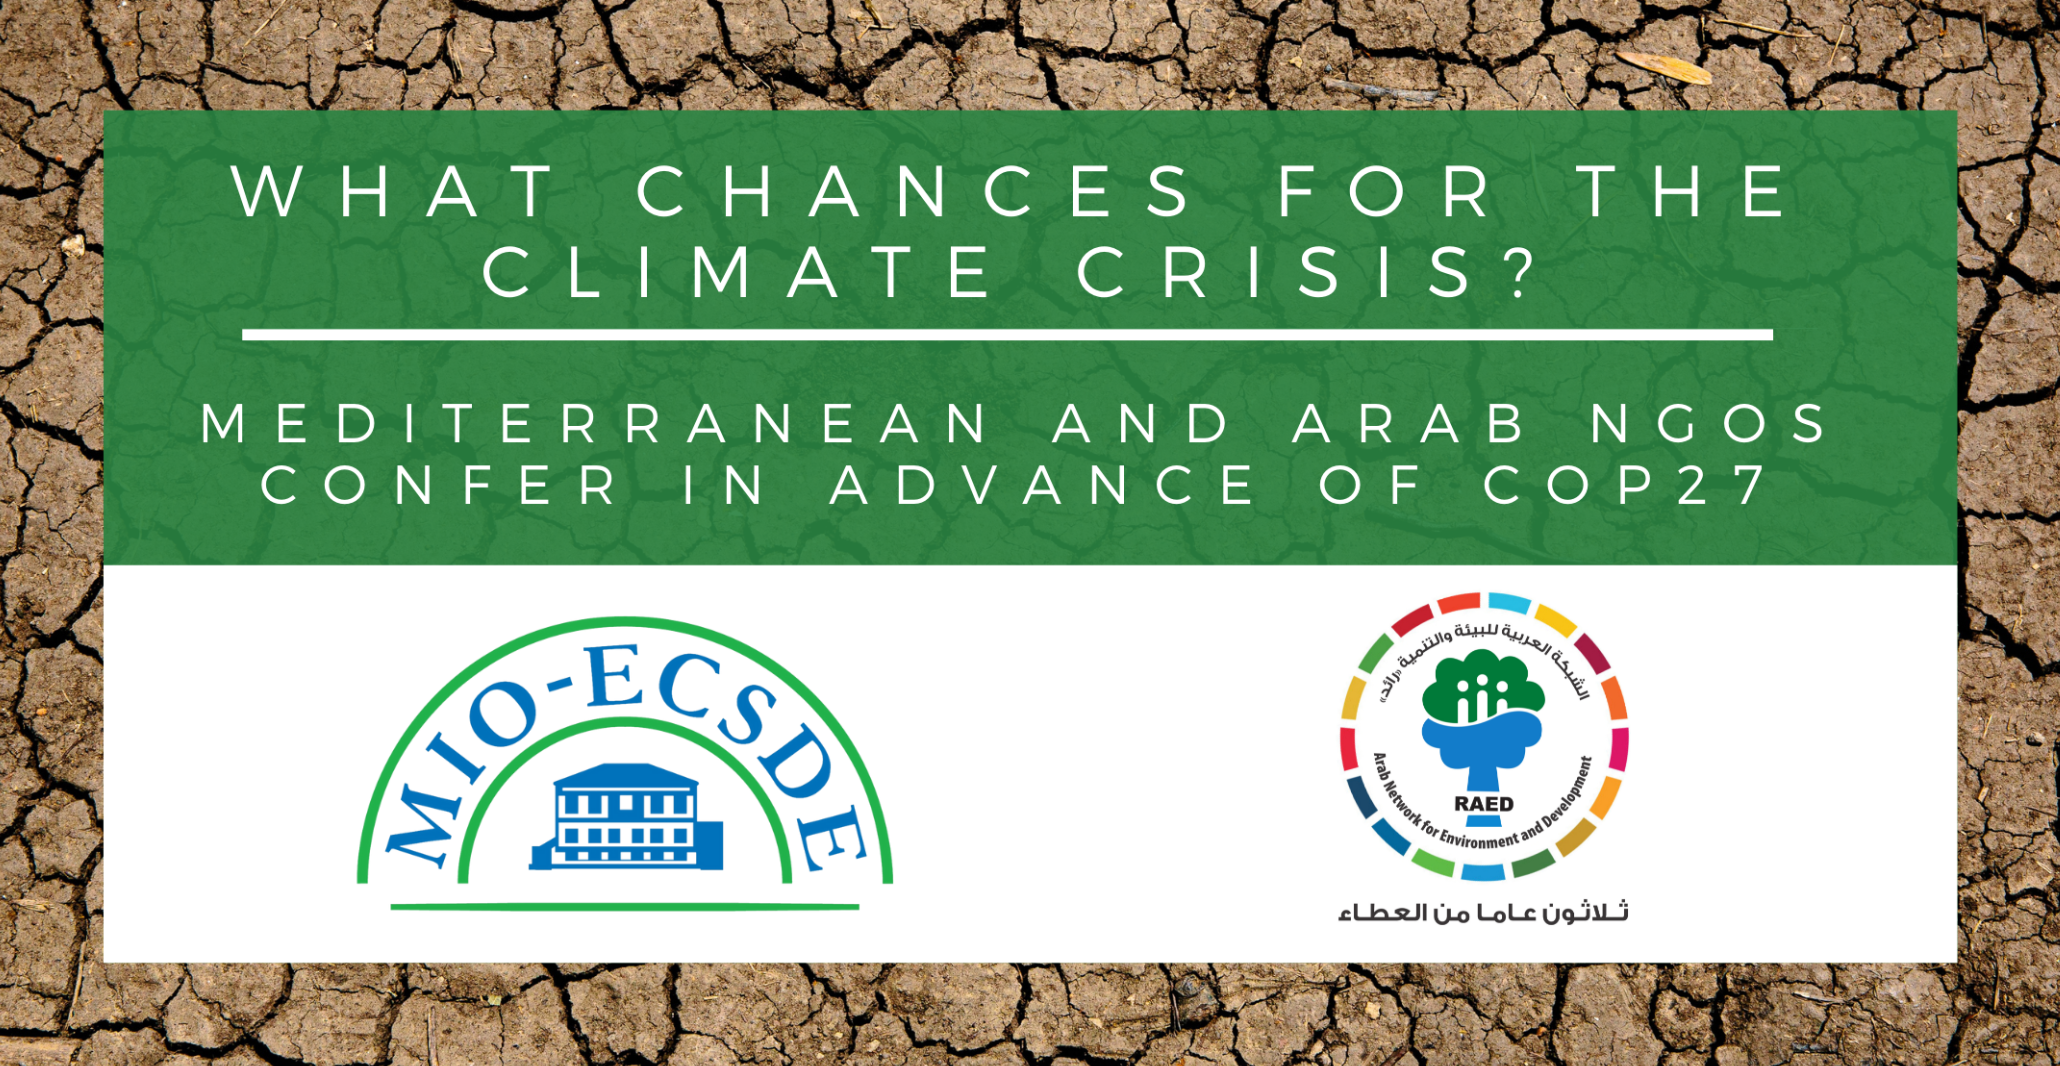 Read more about the article “What chances for the climate crisis? Mediterranean and Arab NGOs confer in advance of COP27?”